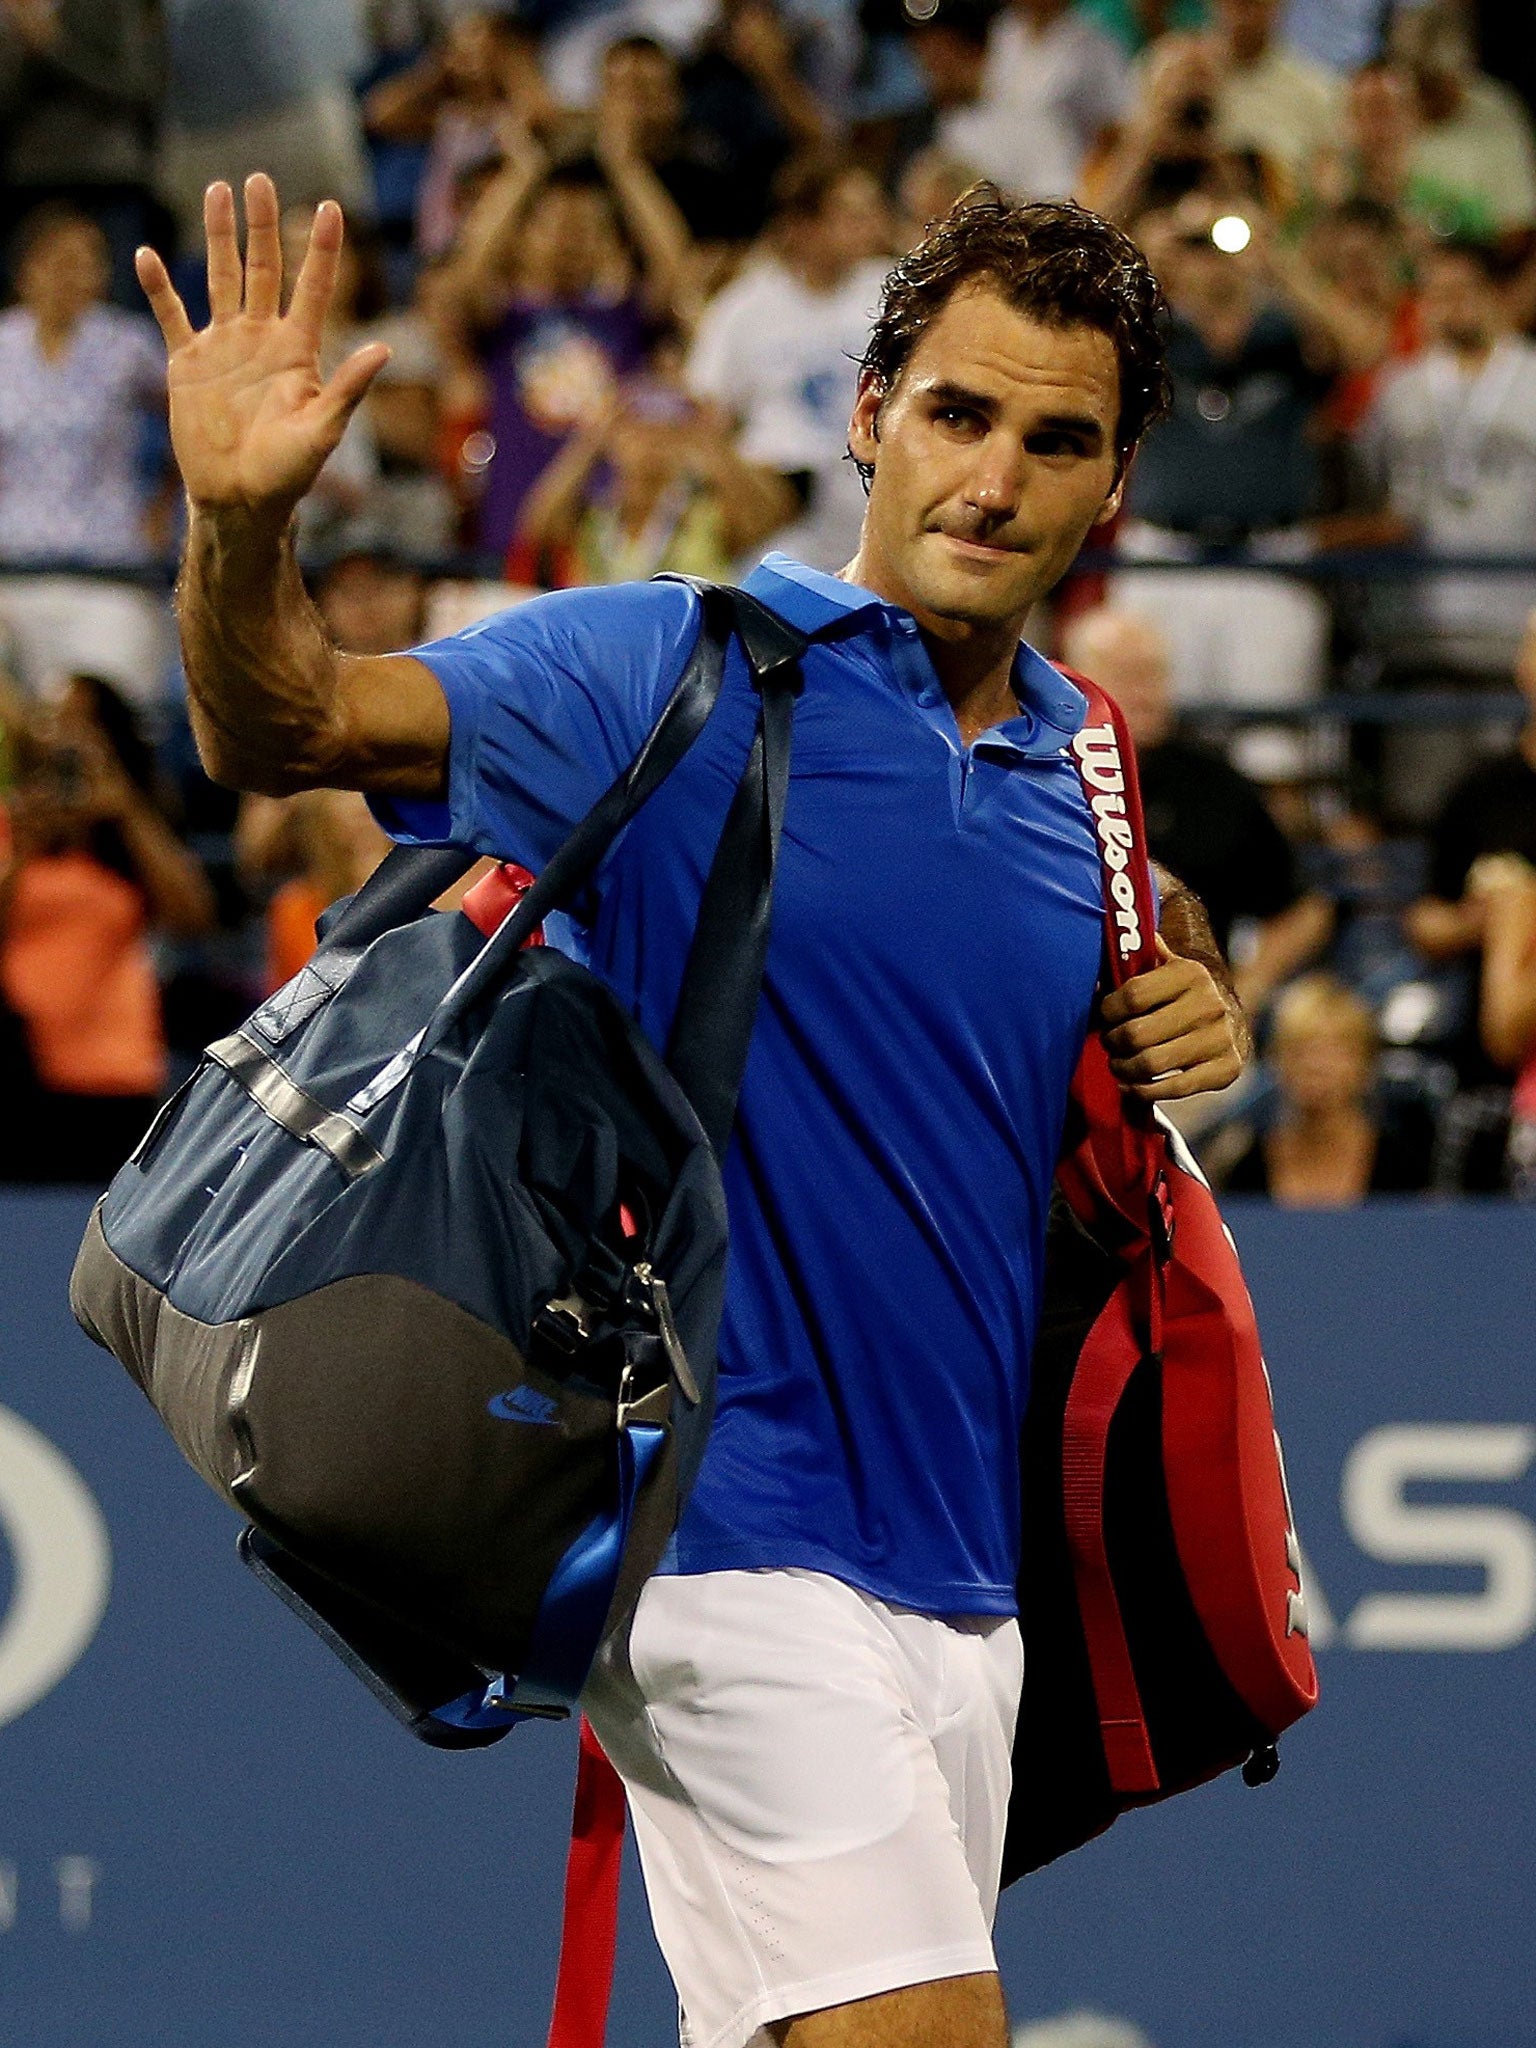 Roger Federer waves goodbye to the Flushing Meadows crowd after the latest defeat in his least successful year since 2002